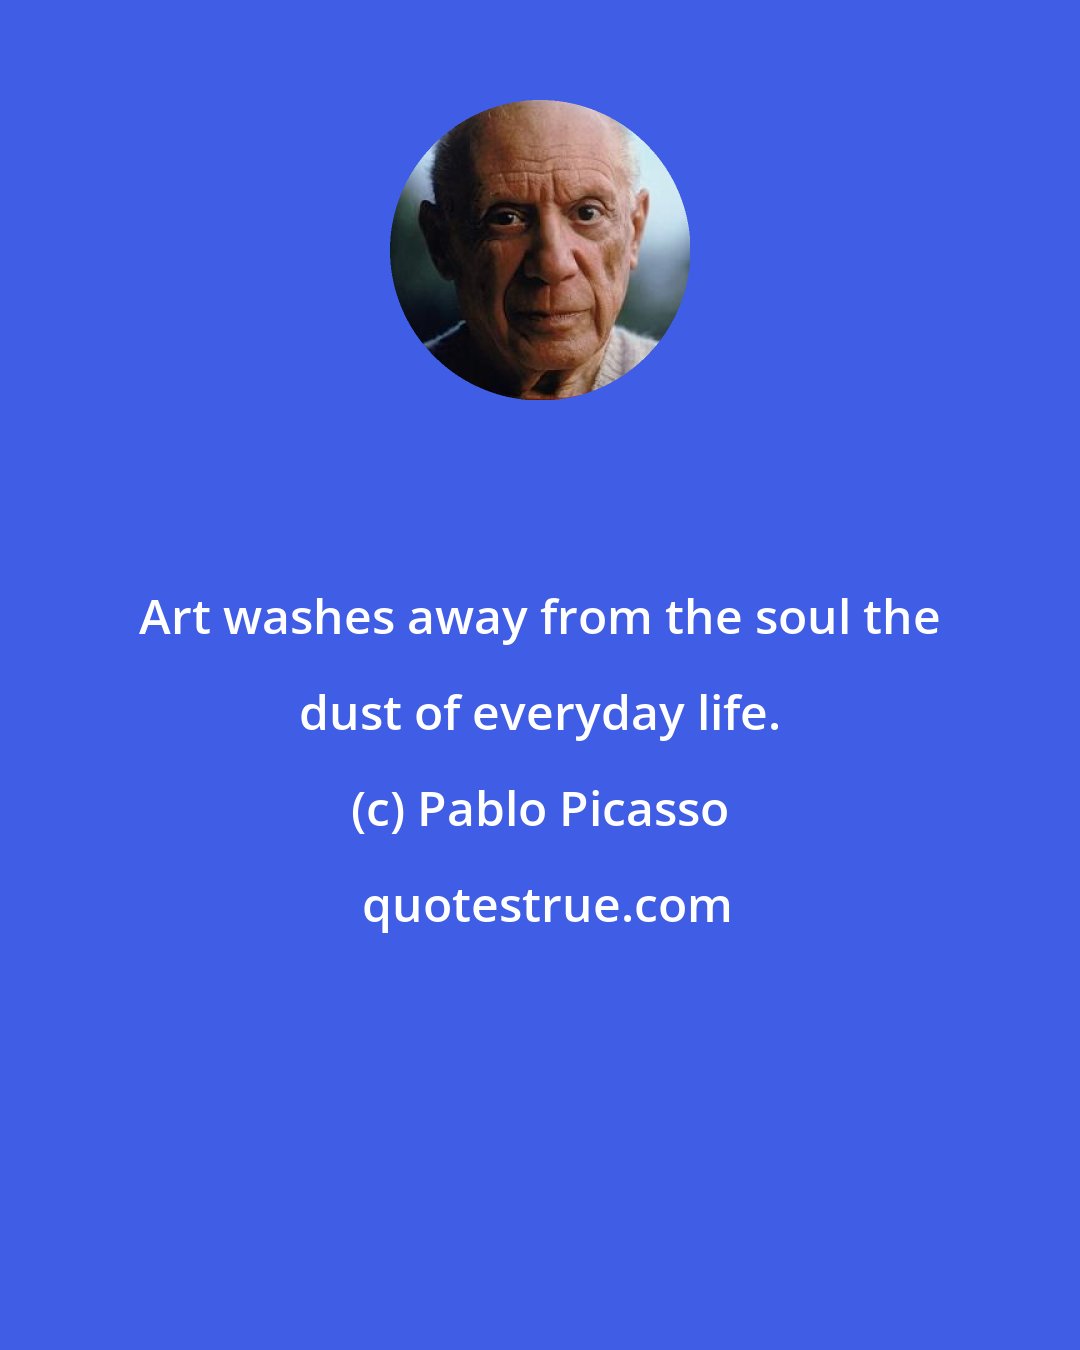 Pablo Picasso: Art washes away from the soul the dust of everyday life.